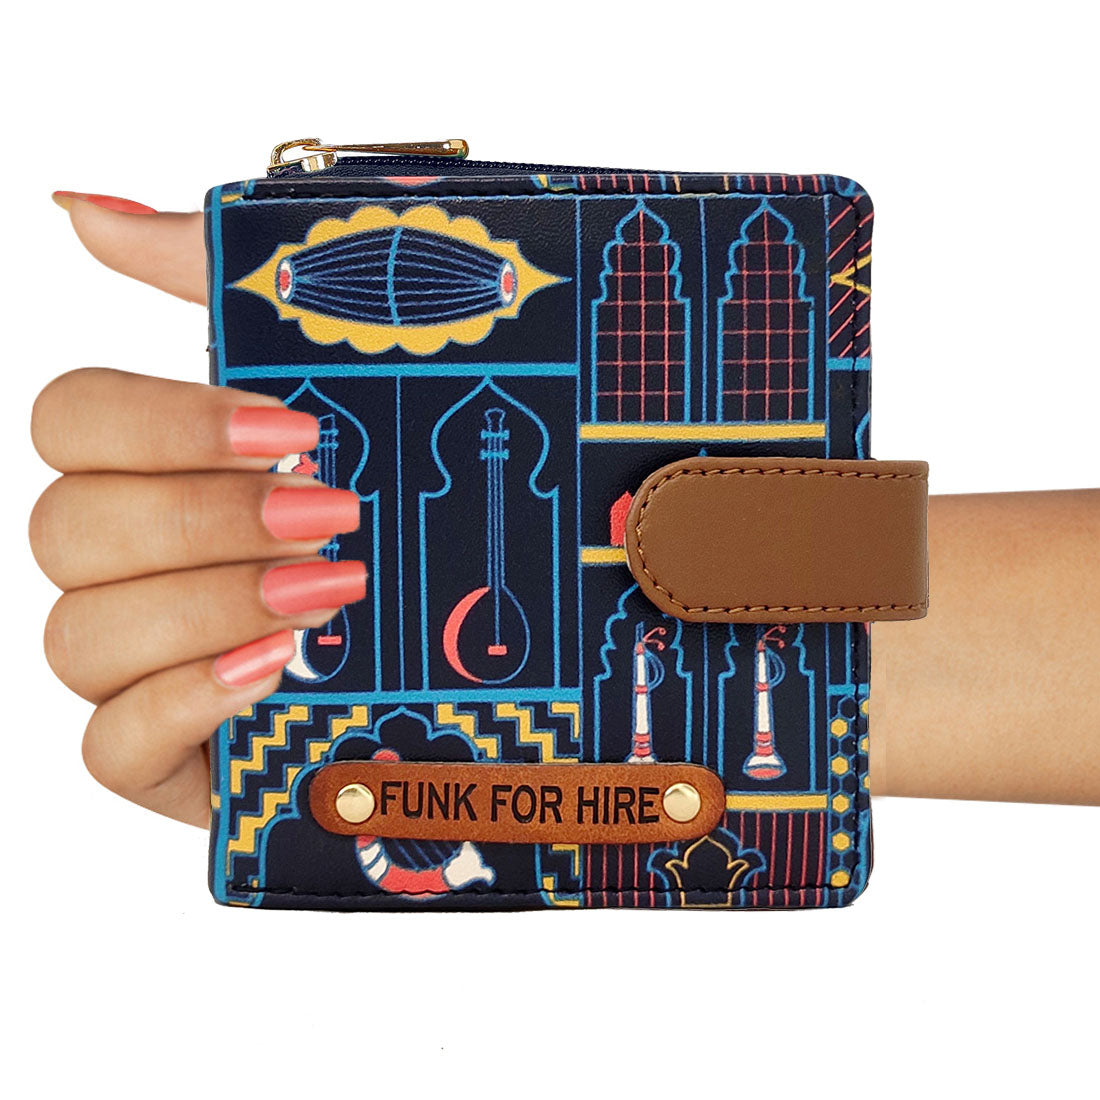 Combo Offers : Music Wall Loop Navy & Pocket Music Bdr Wallet Multi